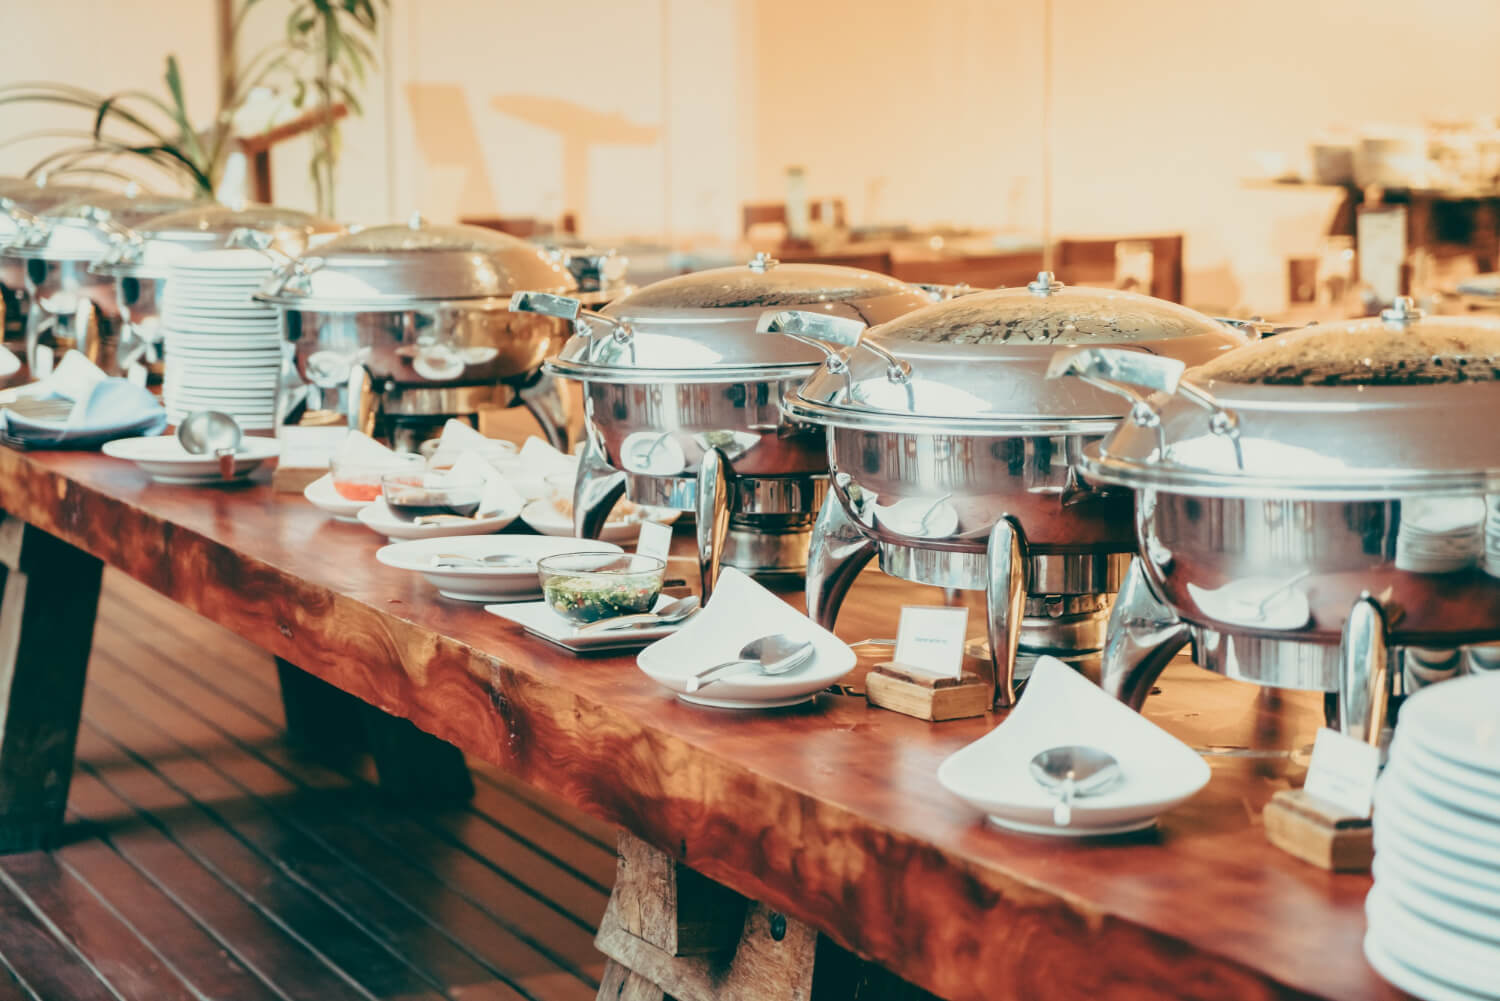 5 Key Features Customers Look For in a Catering Service